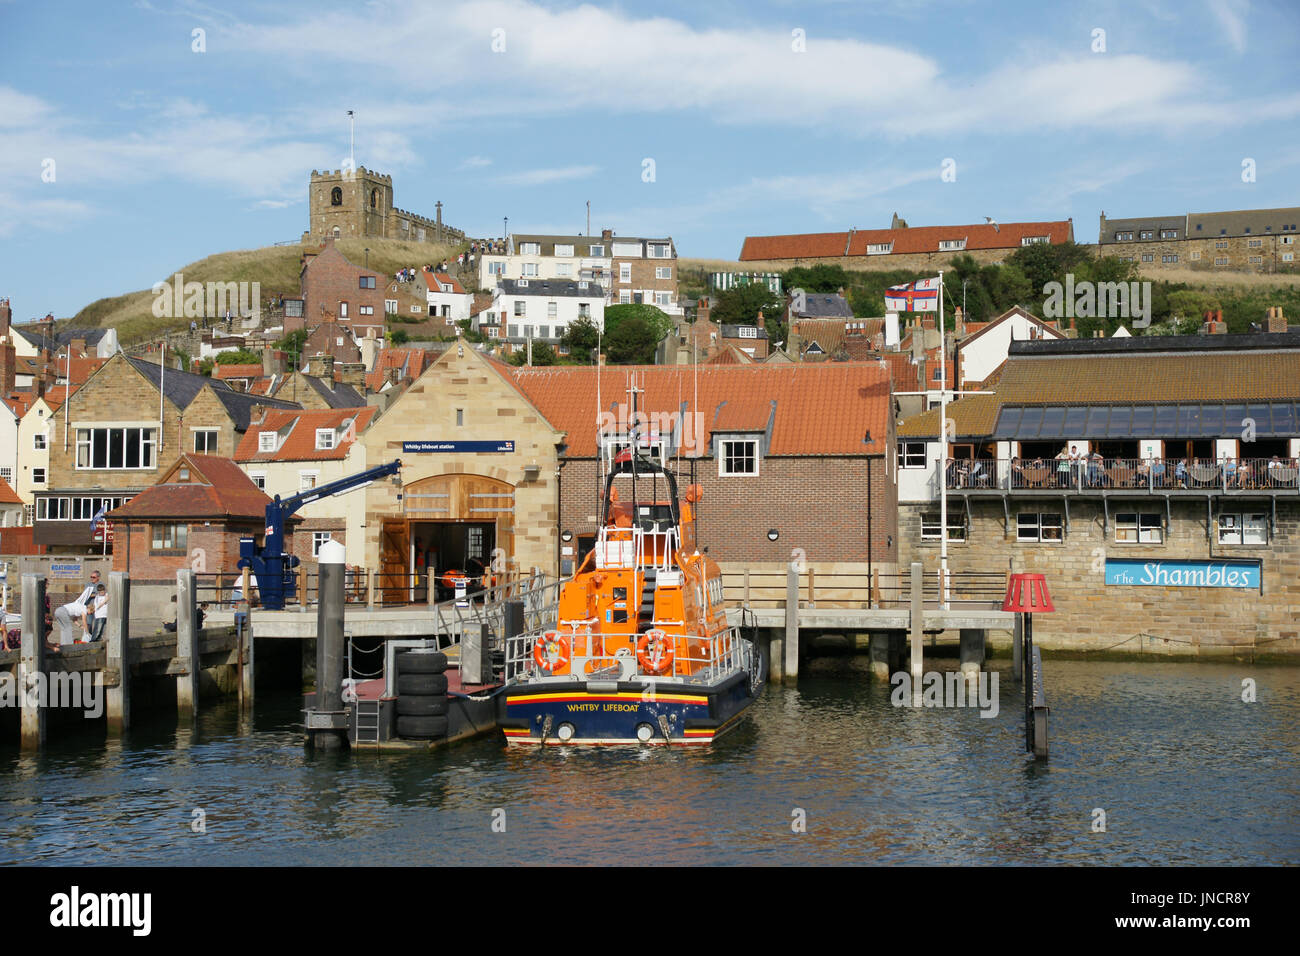 Whitby, North Yorkshire Foto Stock